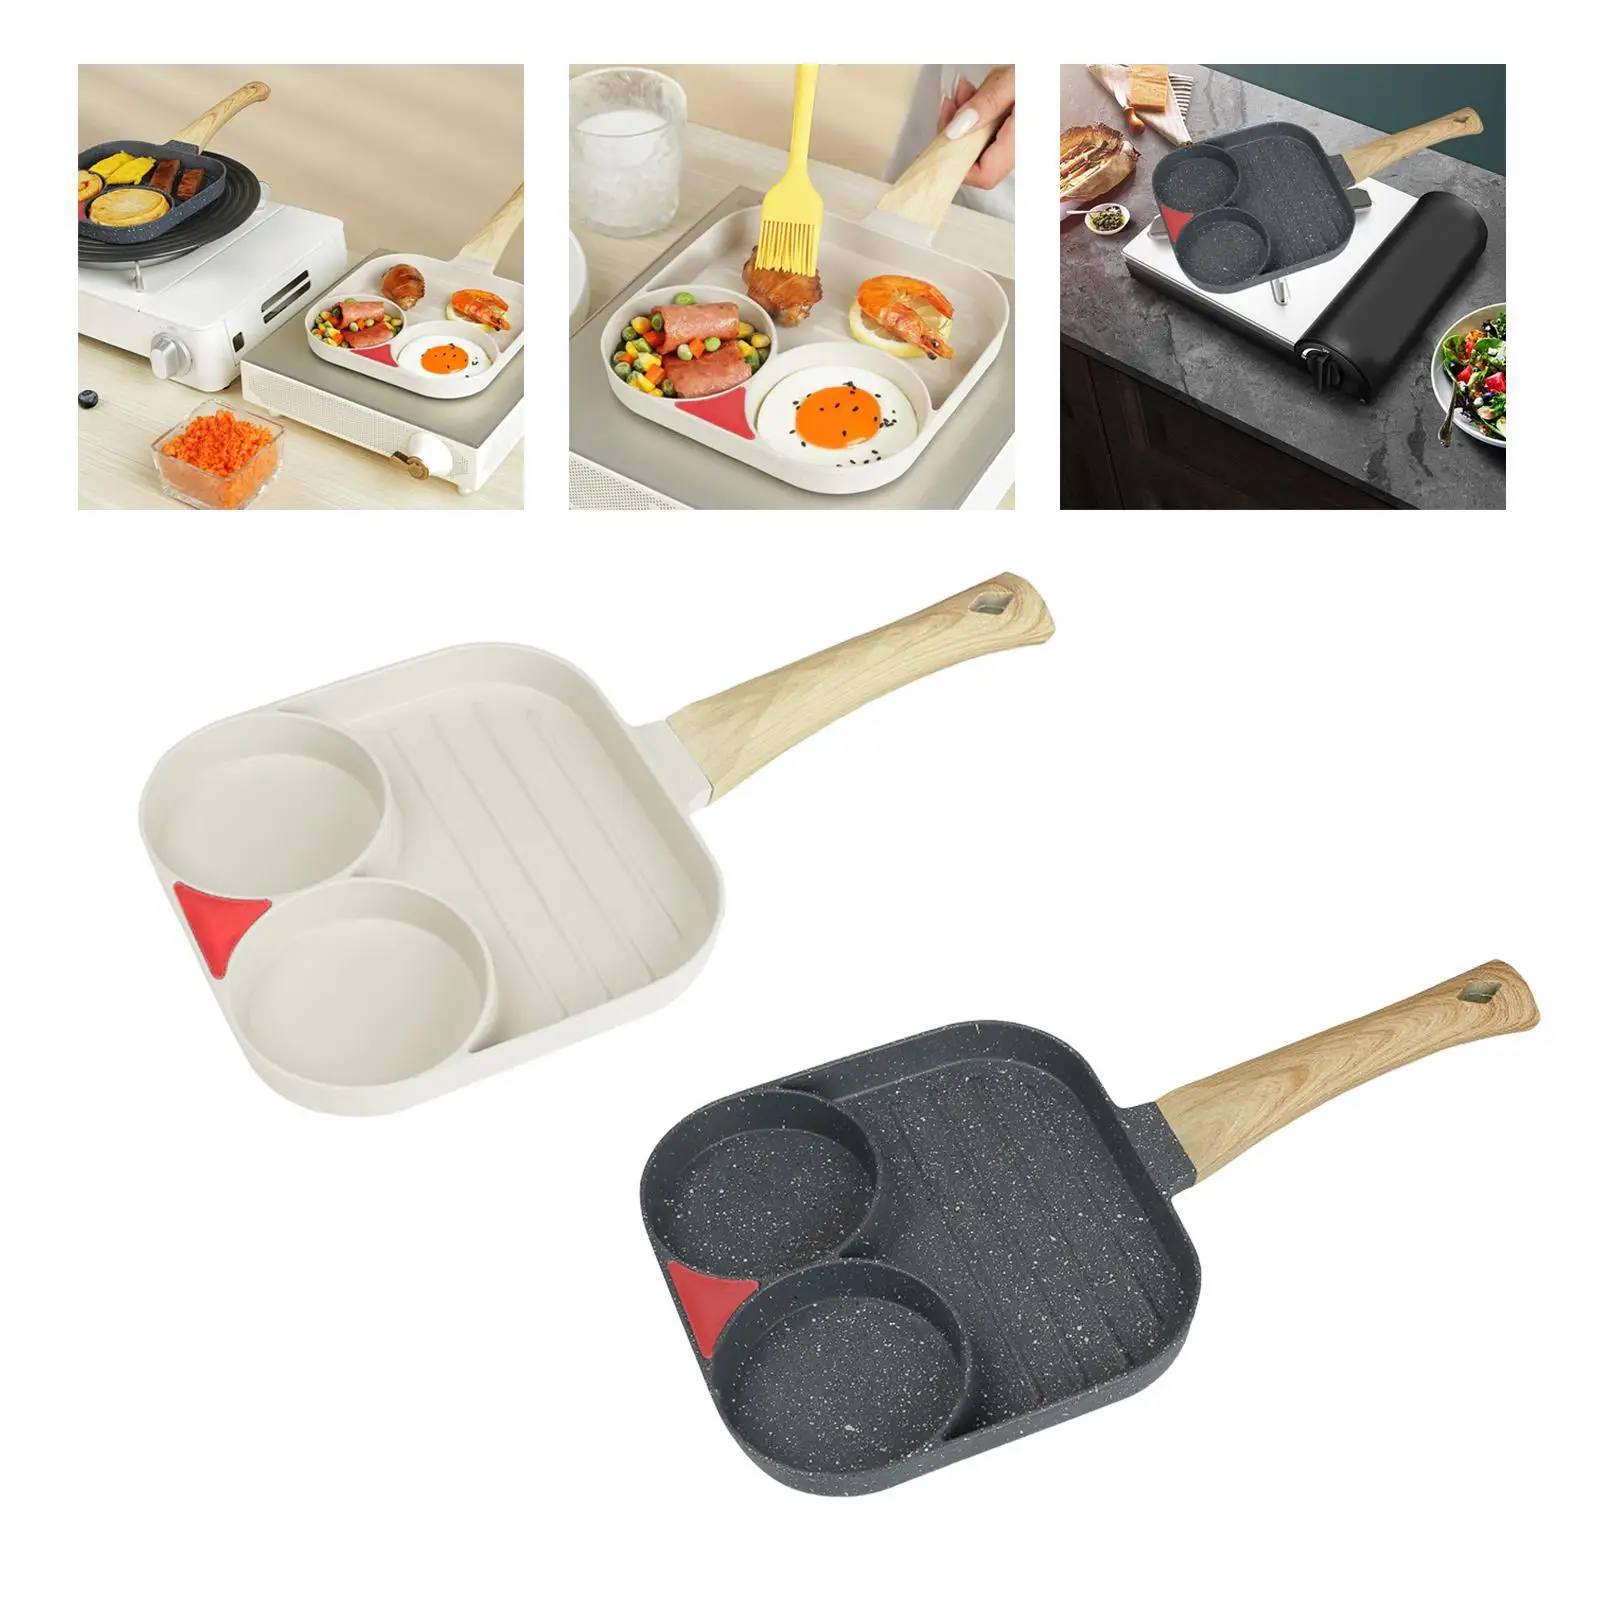 2 Hole Breakfast Frying Pan with Wooden Handle 3 Section Divided Skillet Omelet Pot for Frying Baking Vegetable Burger Breakfast